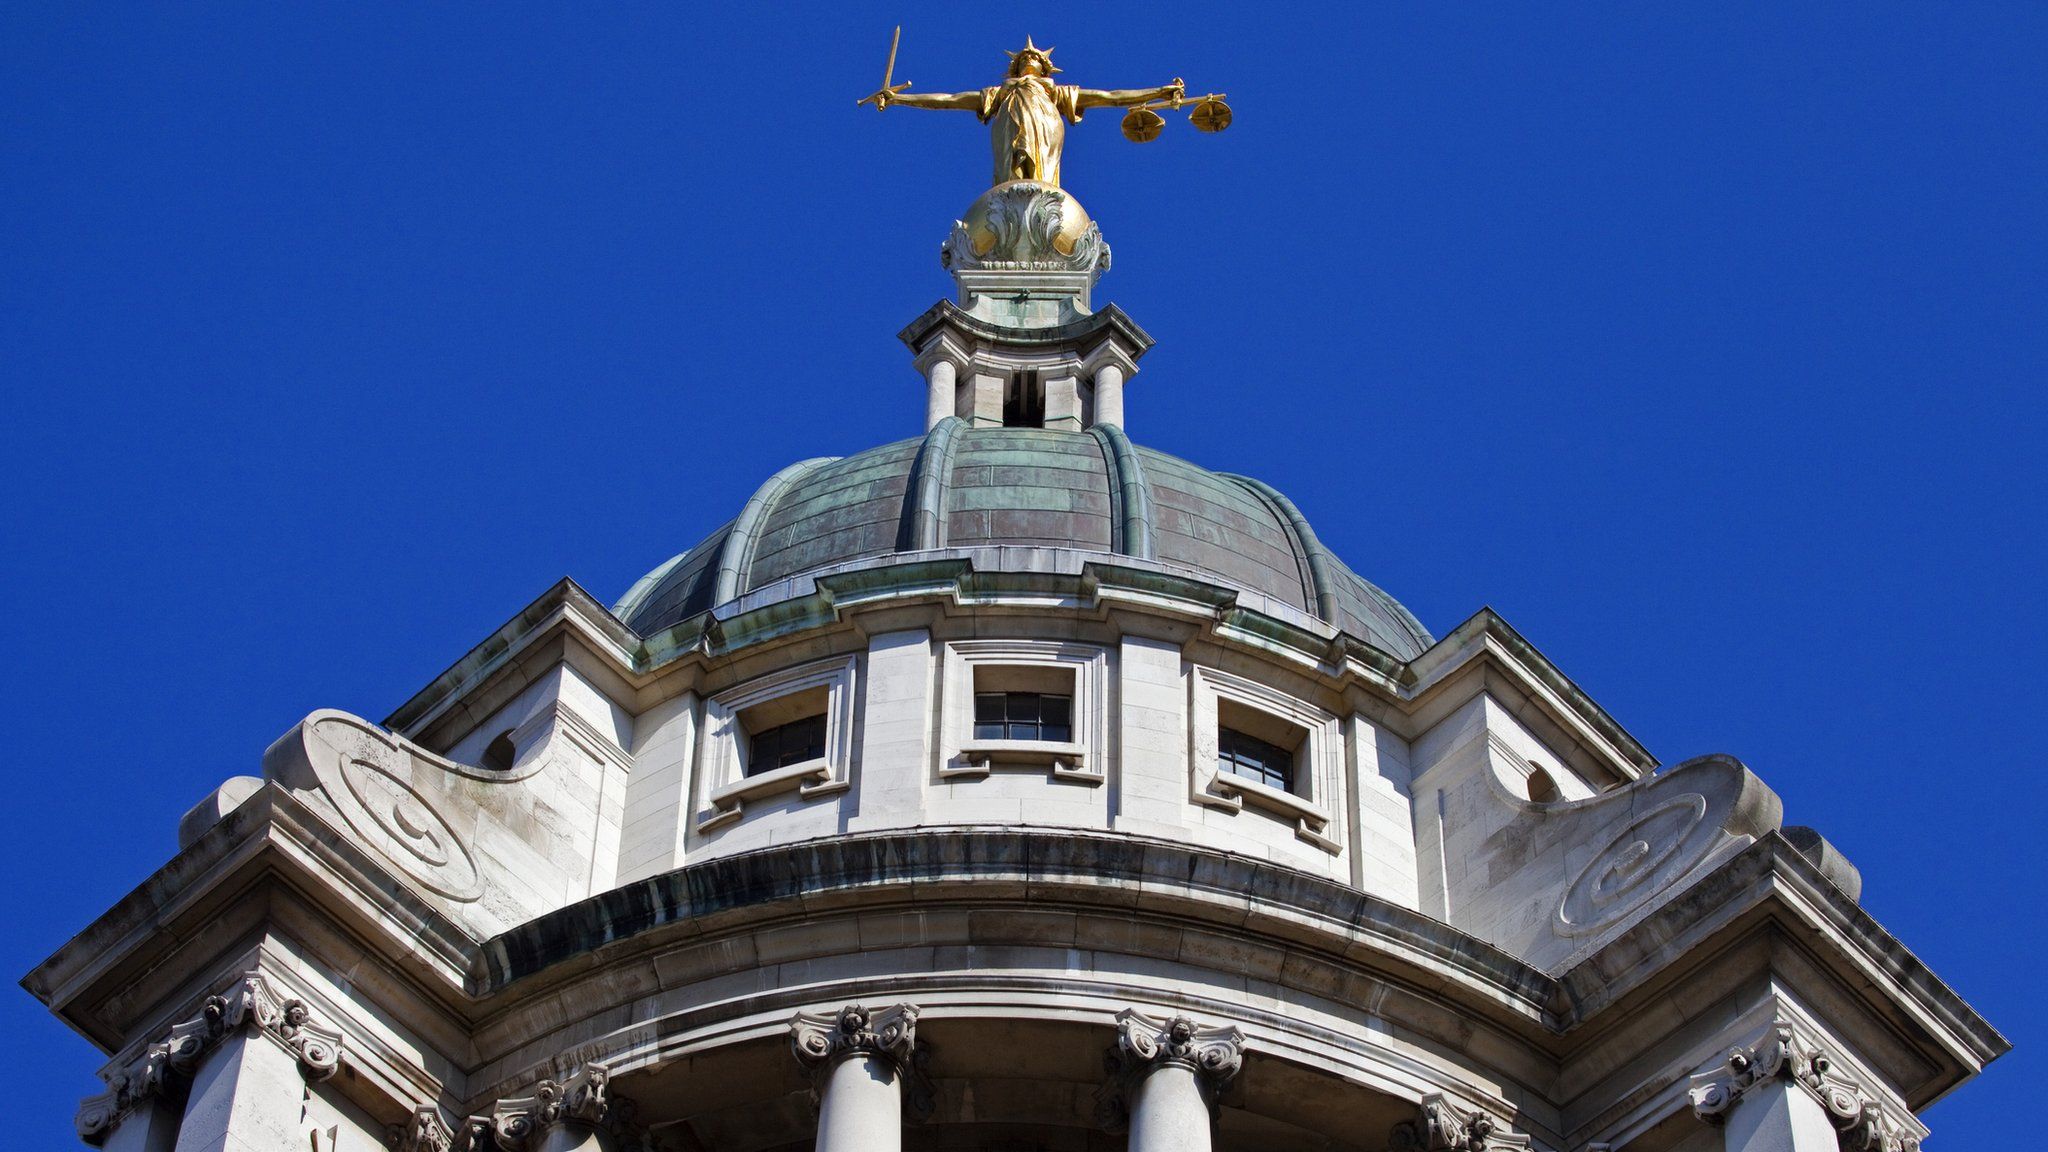 Lady Justice statue on top of the Old Bailey building